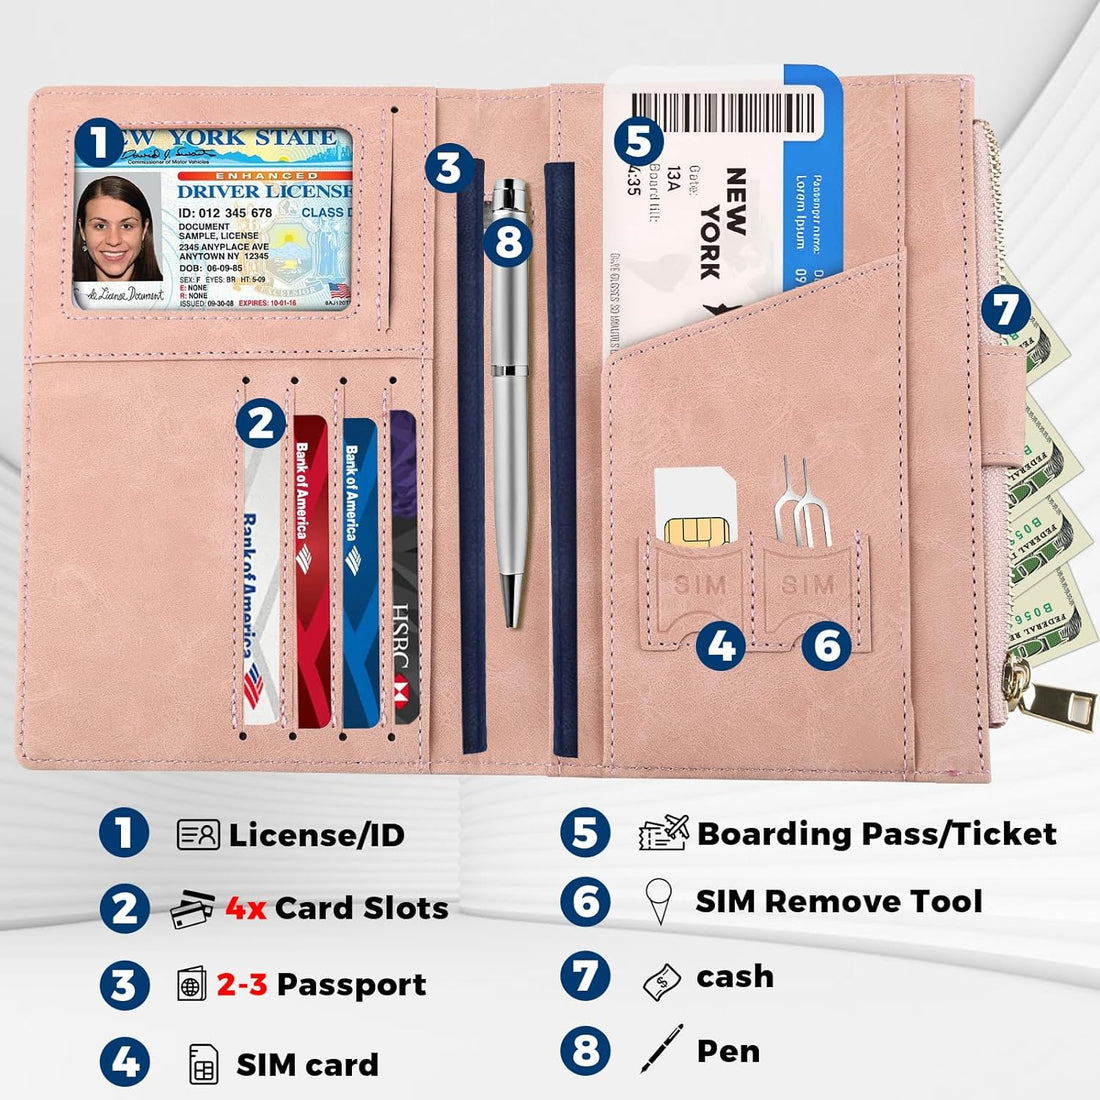 PACKOVIA Passport Holder Women, RFID Travel Passport Wallet with Card Slot & Zipper Pocket, Multiple Leather Passport Case Cover for Ladies, Travel Document Organizer for Passport with Luggage Tag